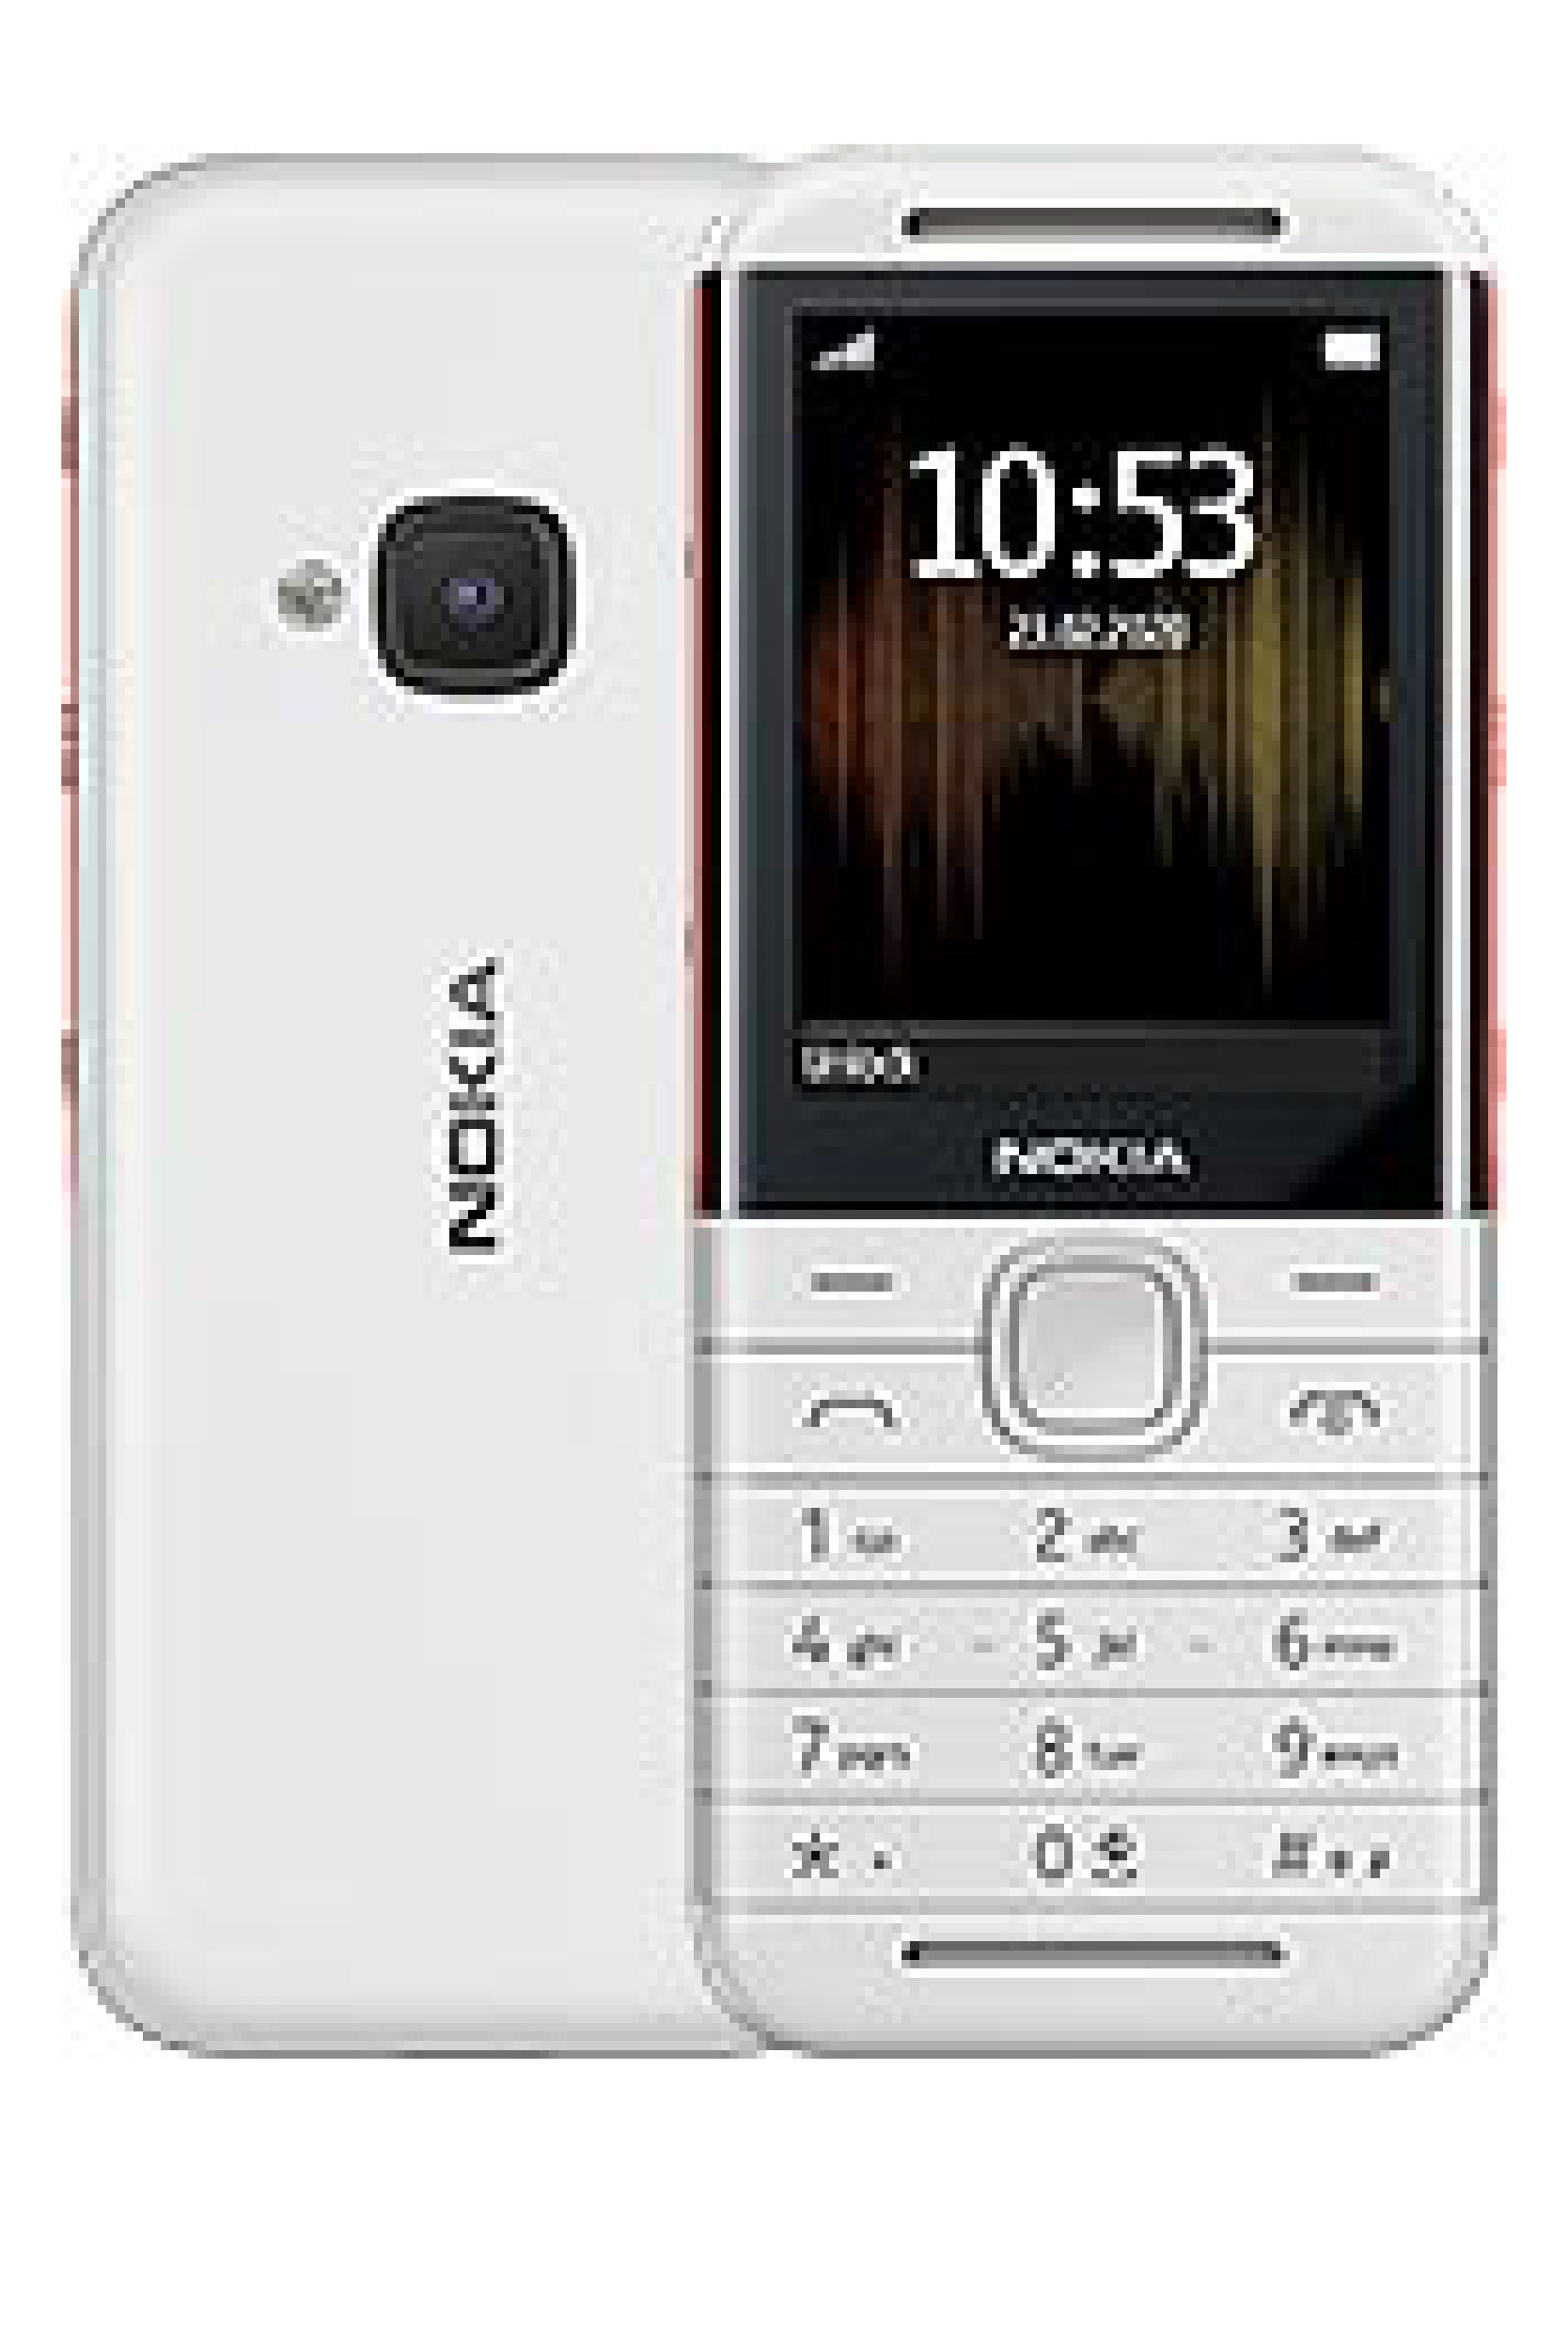 Nokia 5310 2020 Price In Pakistan Specs Daily Updated